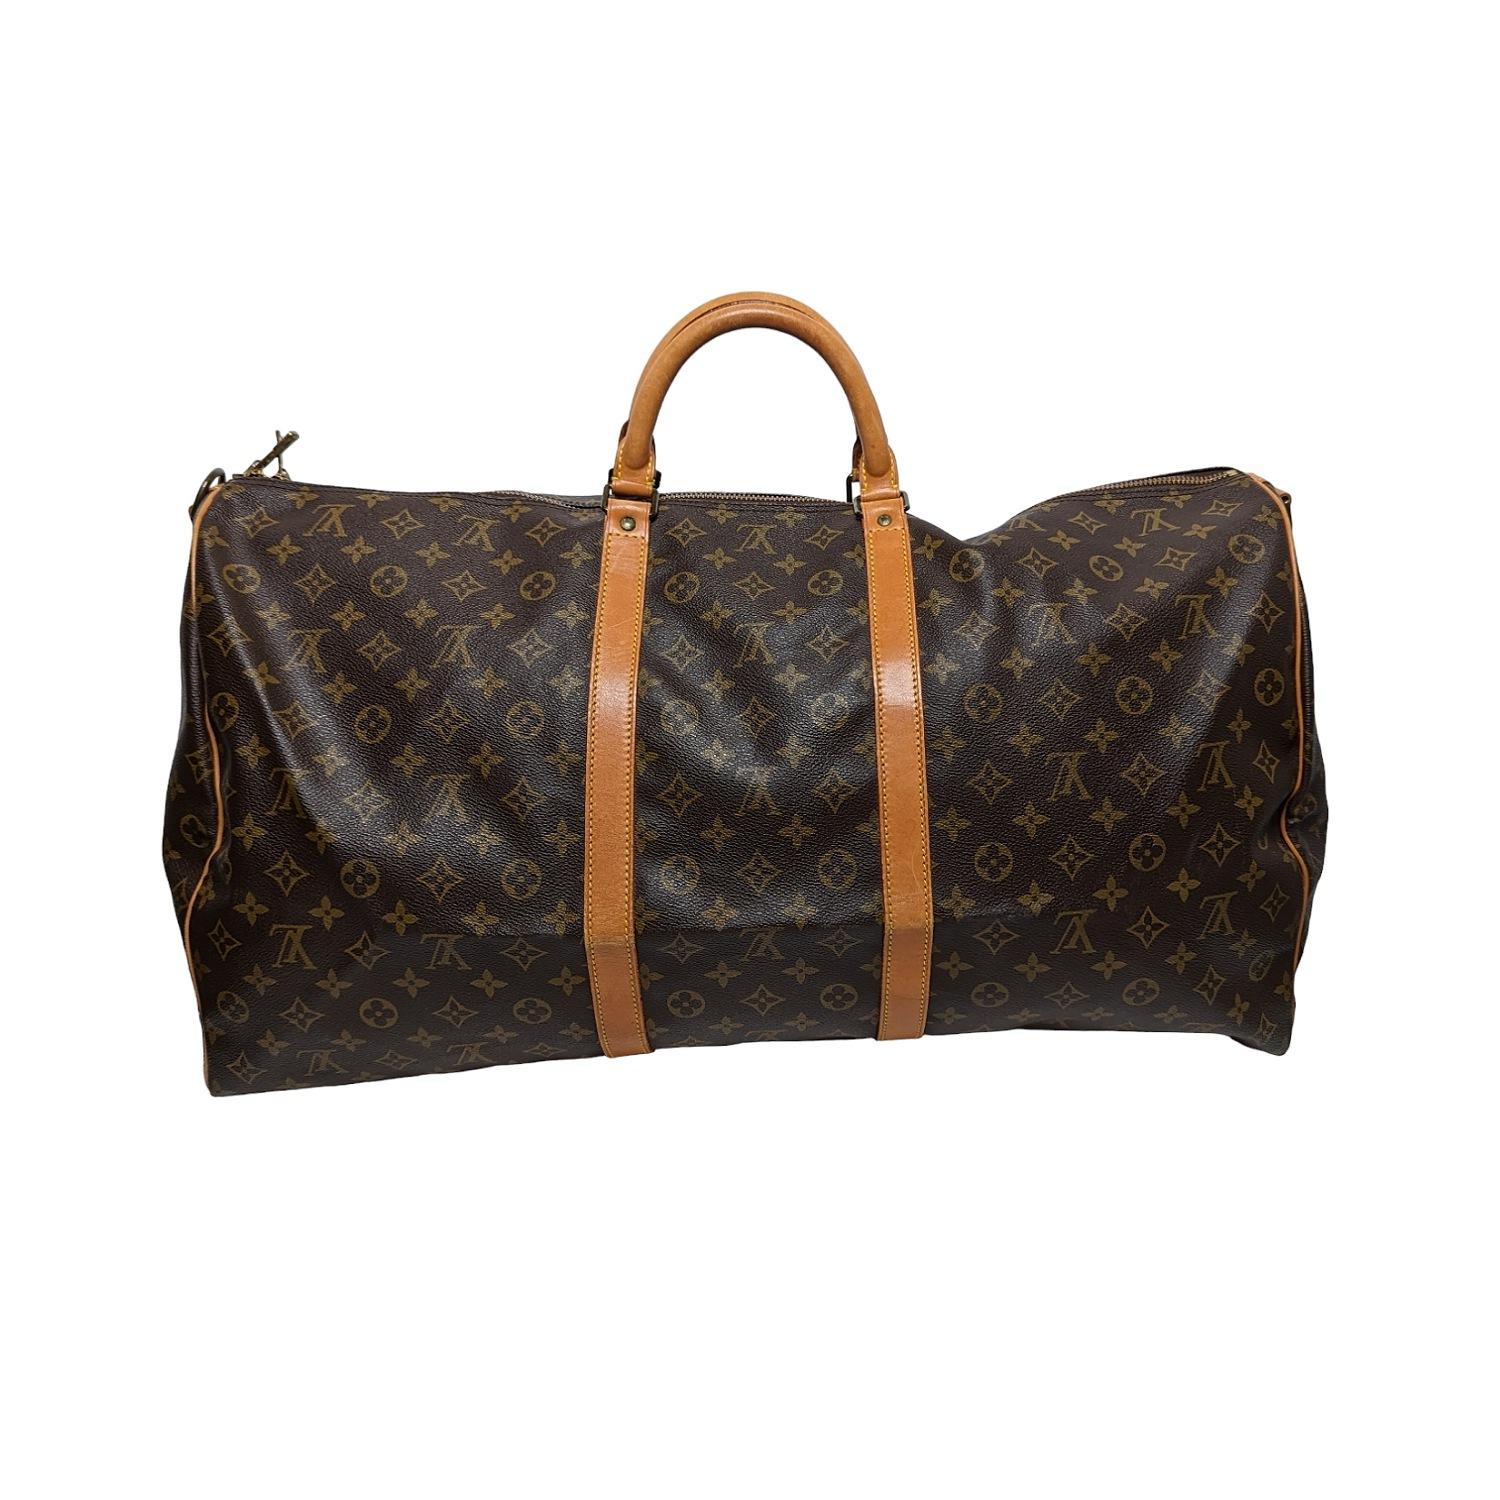 This stylish duffel is crafted of signature Louis Vuitton monogram toile canvas. This bag features vachetta cowhide leather rolled top handles, vachetta leather trim, and a detachable adjustable shoulder strap. The polished brass top zippers open to